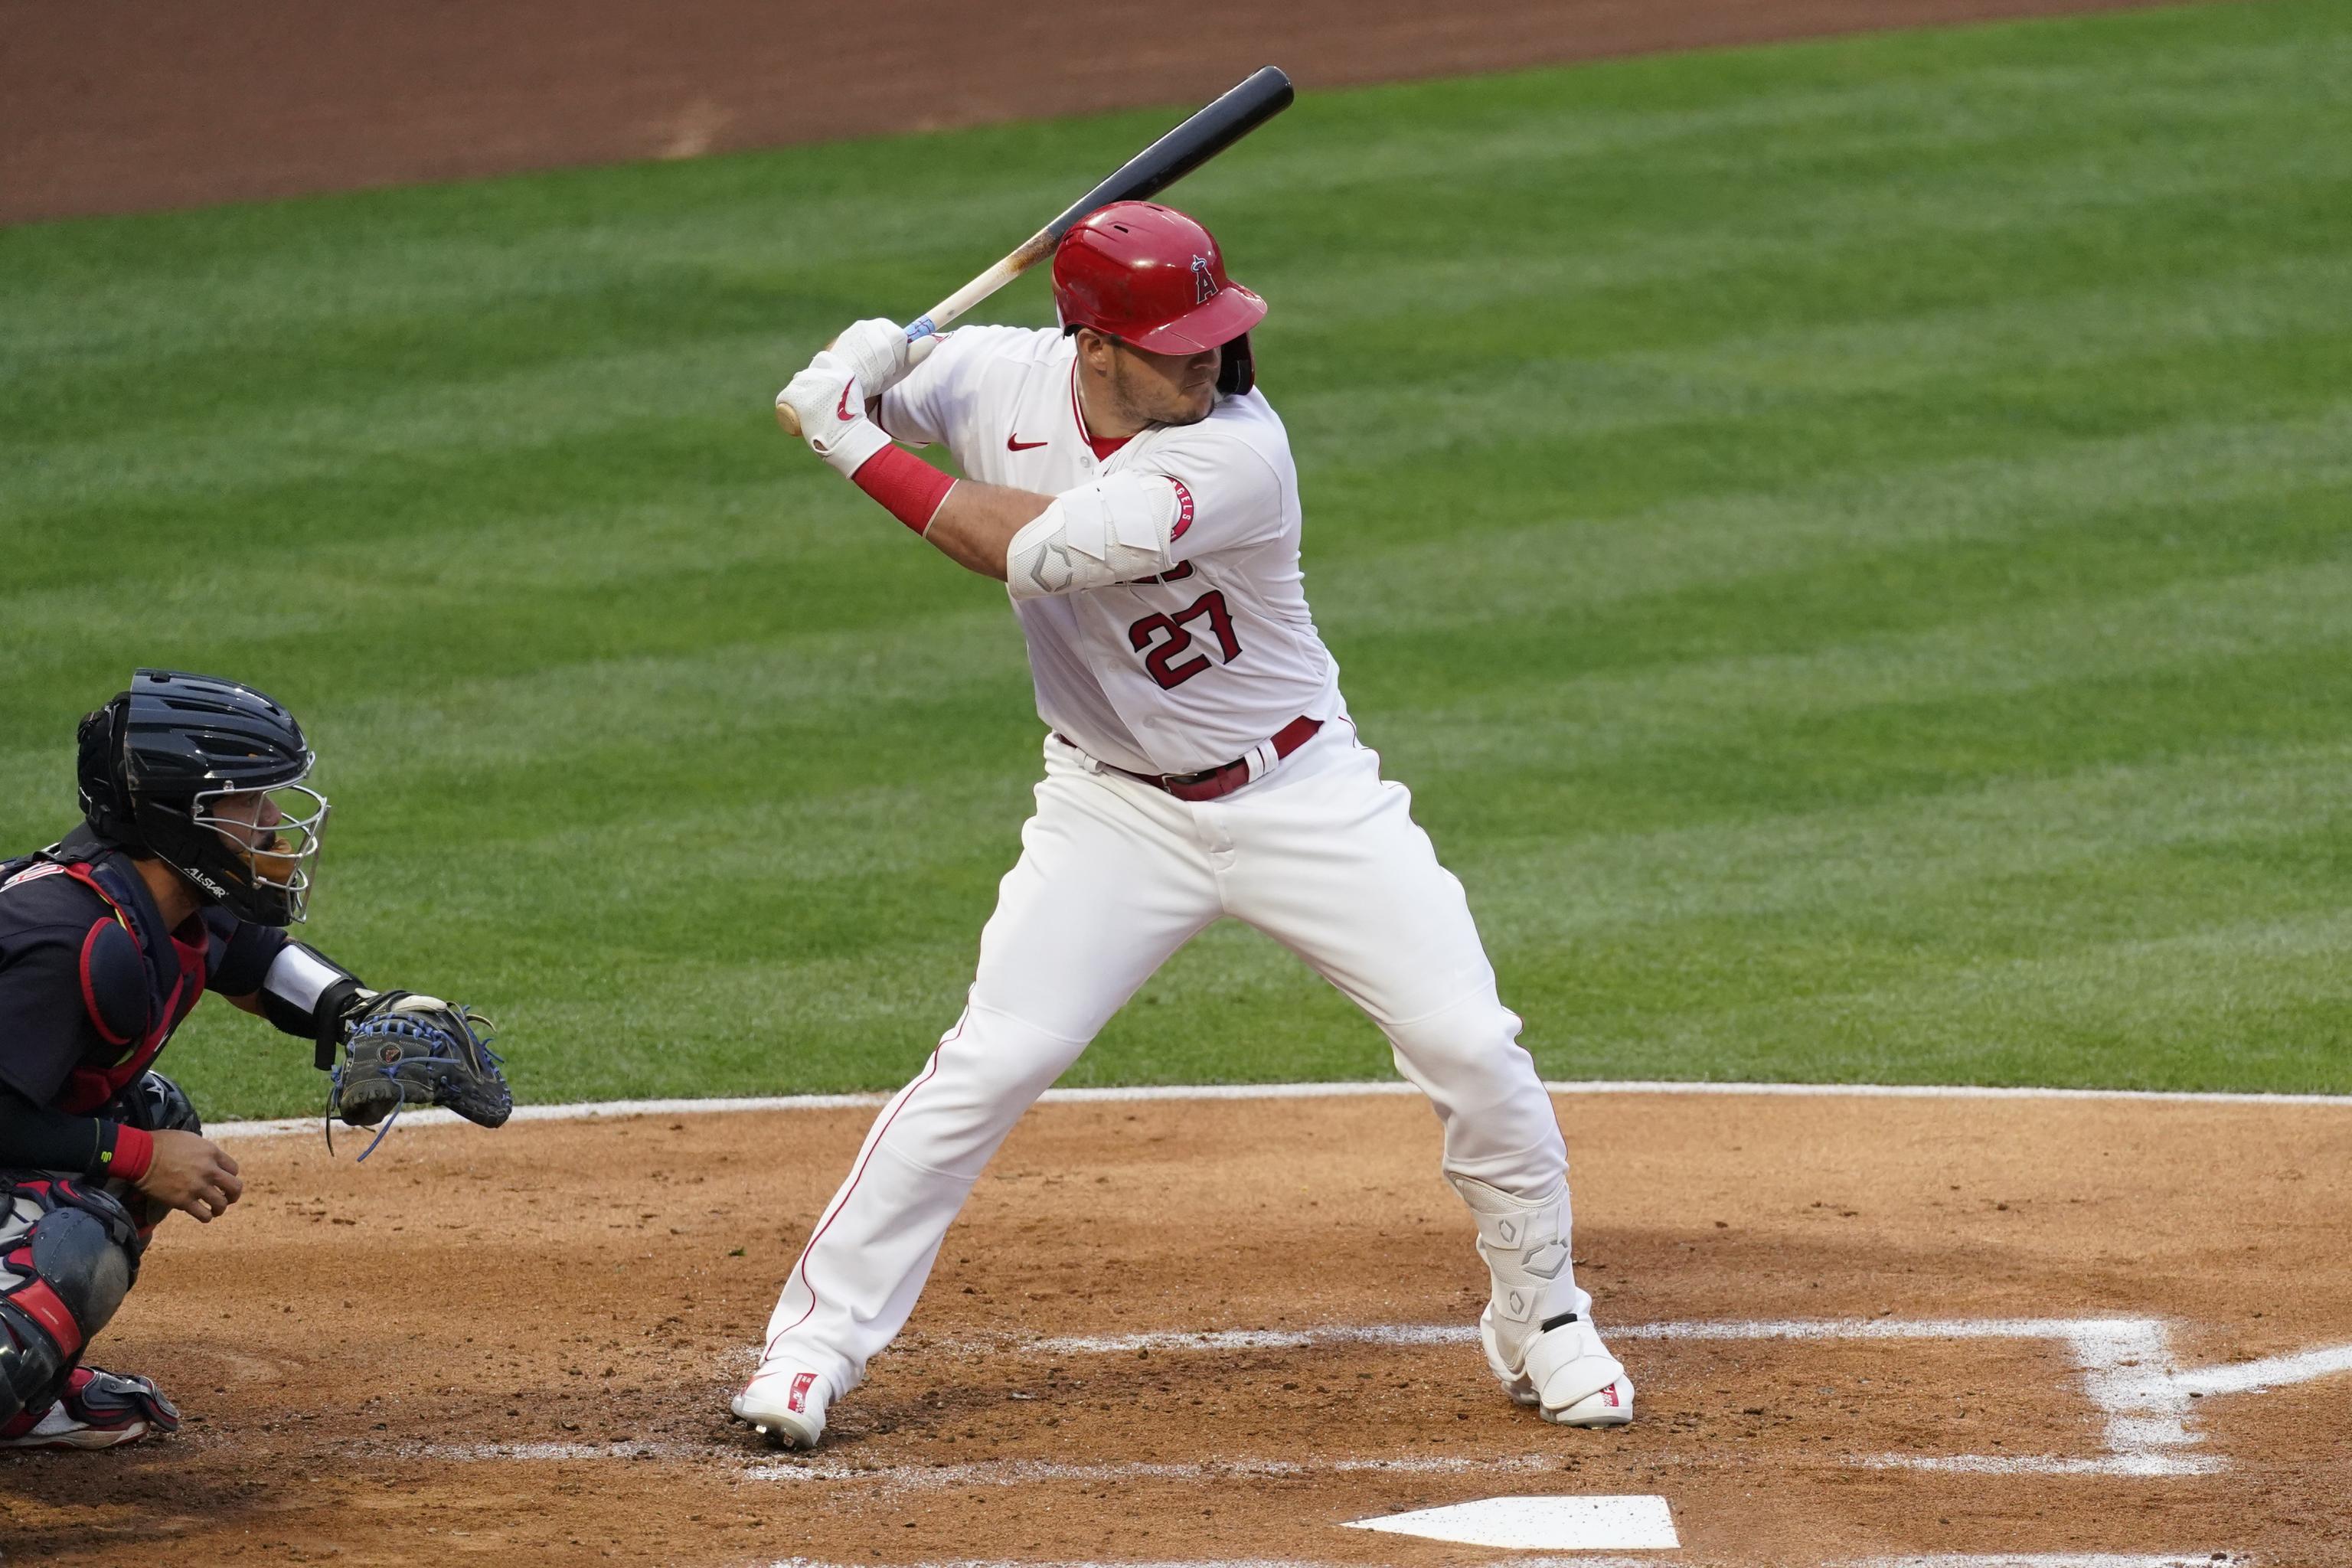 Mike Trout Stats, Fantasy & News